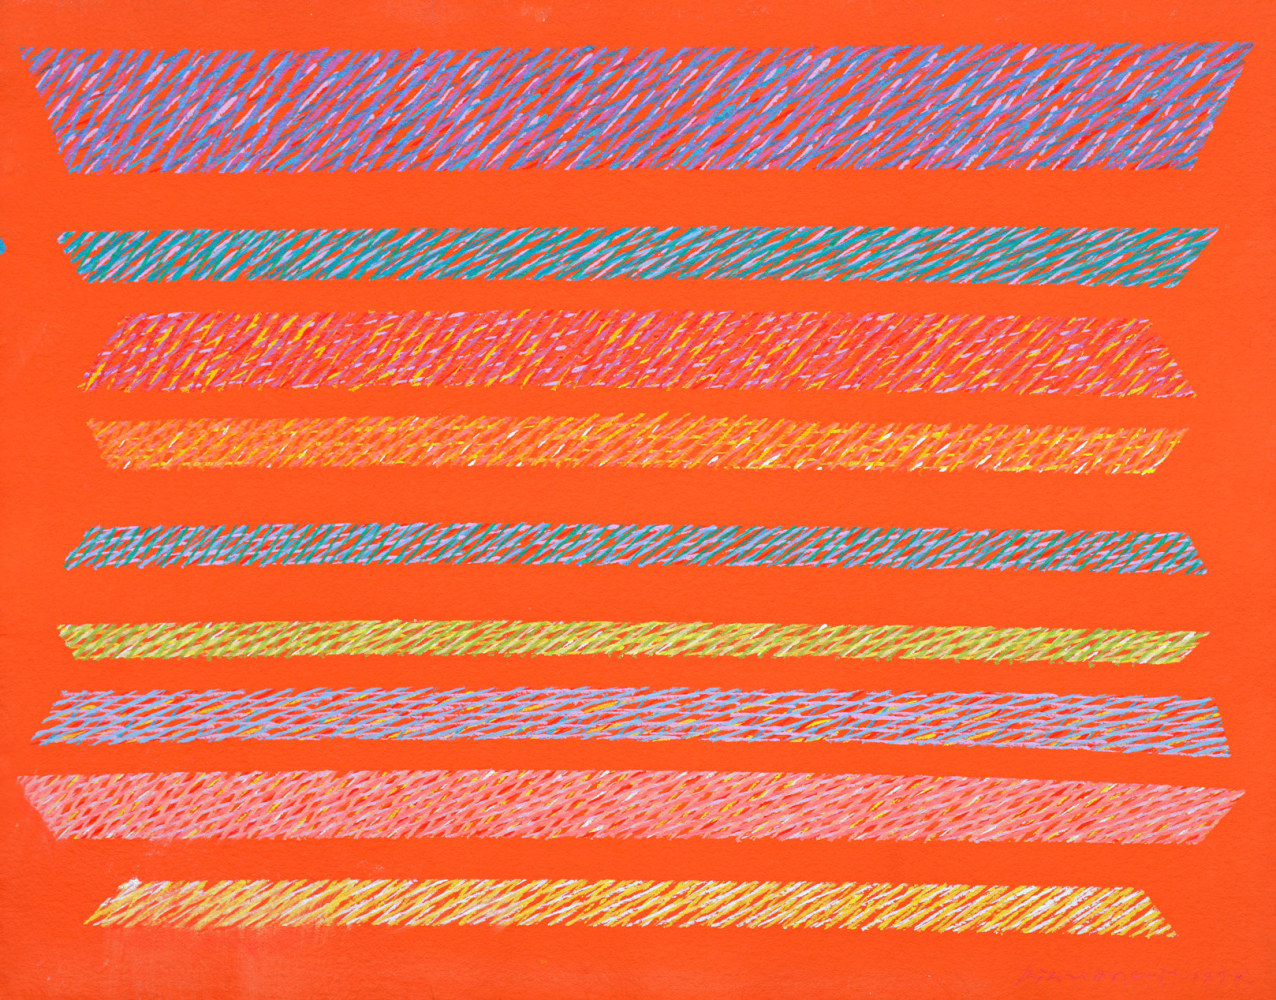 Piero Dorazio (1927&amp;ndash;2005)

(Lines on Red Background), 1998

Ink, crayon, and watercolor on paper
19 1/2 x 25 1/2 in. (49.5 x 64.8 cm)
Inscribed and dated lower right:&amp;nbsp;[?]&amp;nbsp;1998